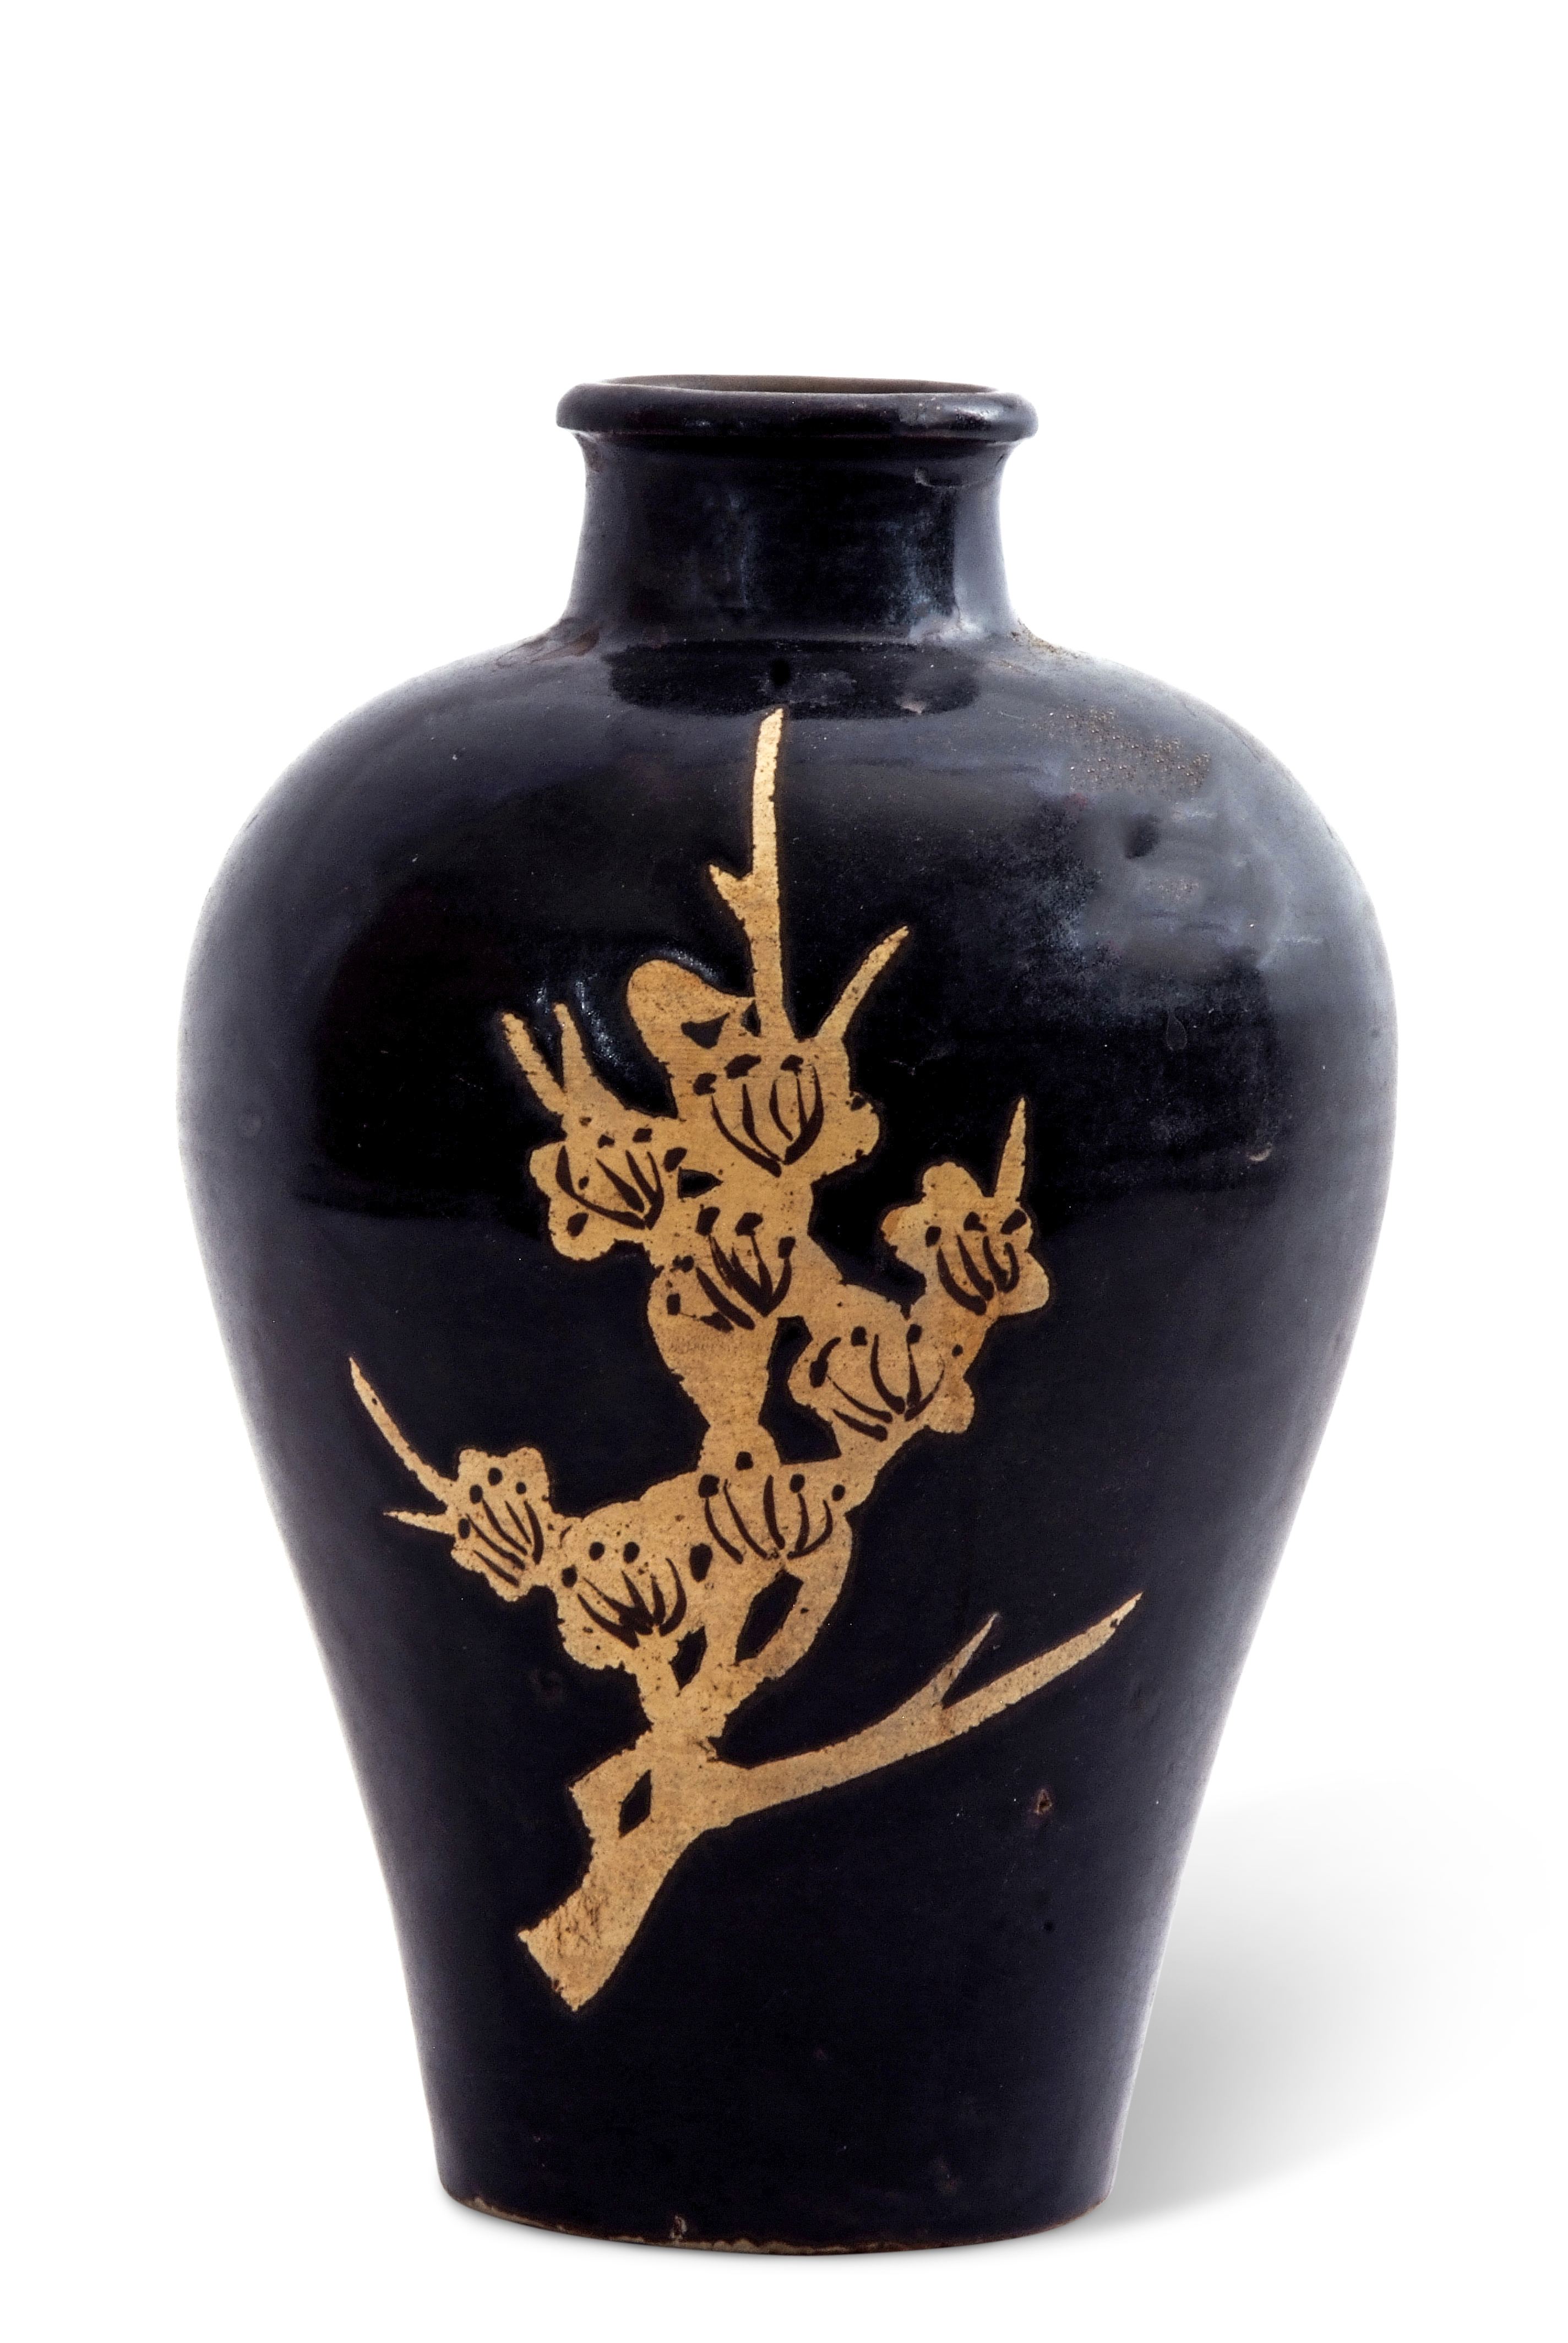 Chinese Cizhou black glazed pottery vase, Yuan/Ming Dynasty, the black background with floral